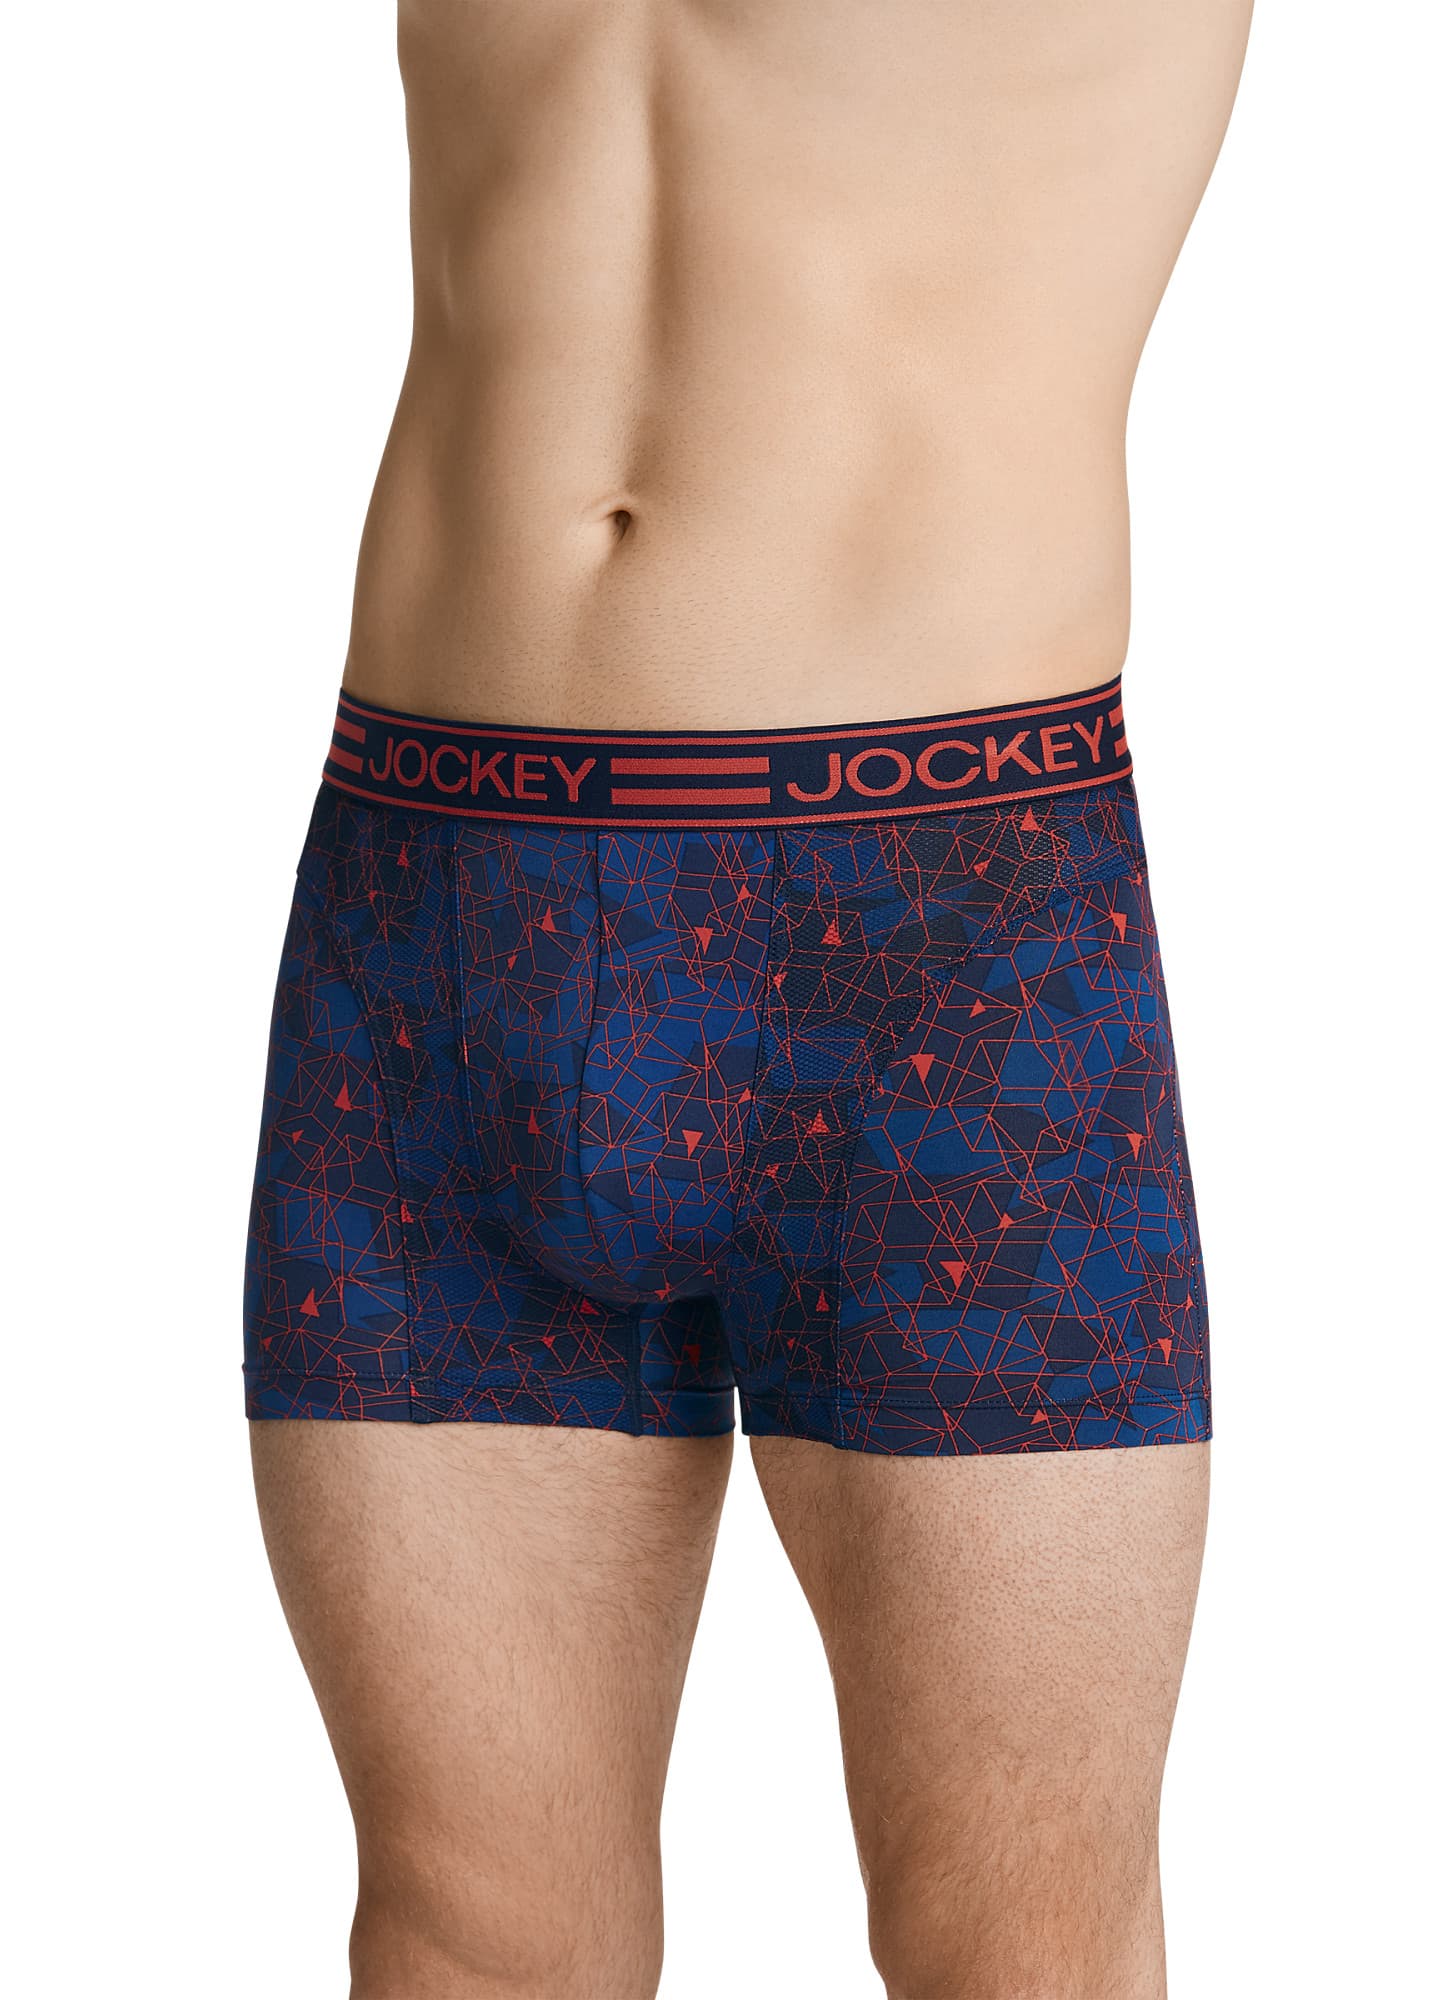 NEW COLOR - JOCKEY SPORT® COOLING MESH PERFORMANCE BRIEF - TRIANGLE PRT L  36-38